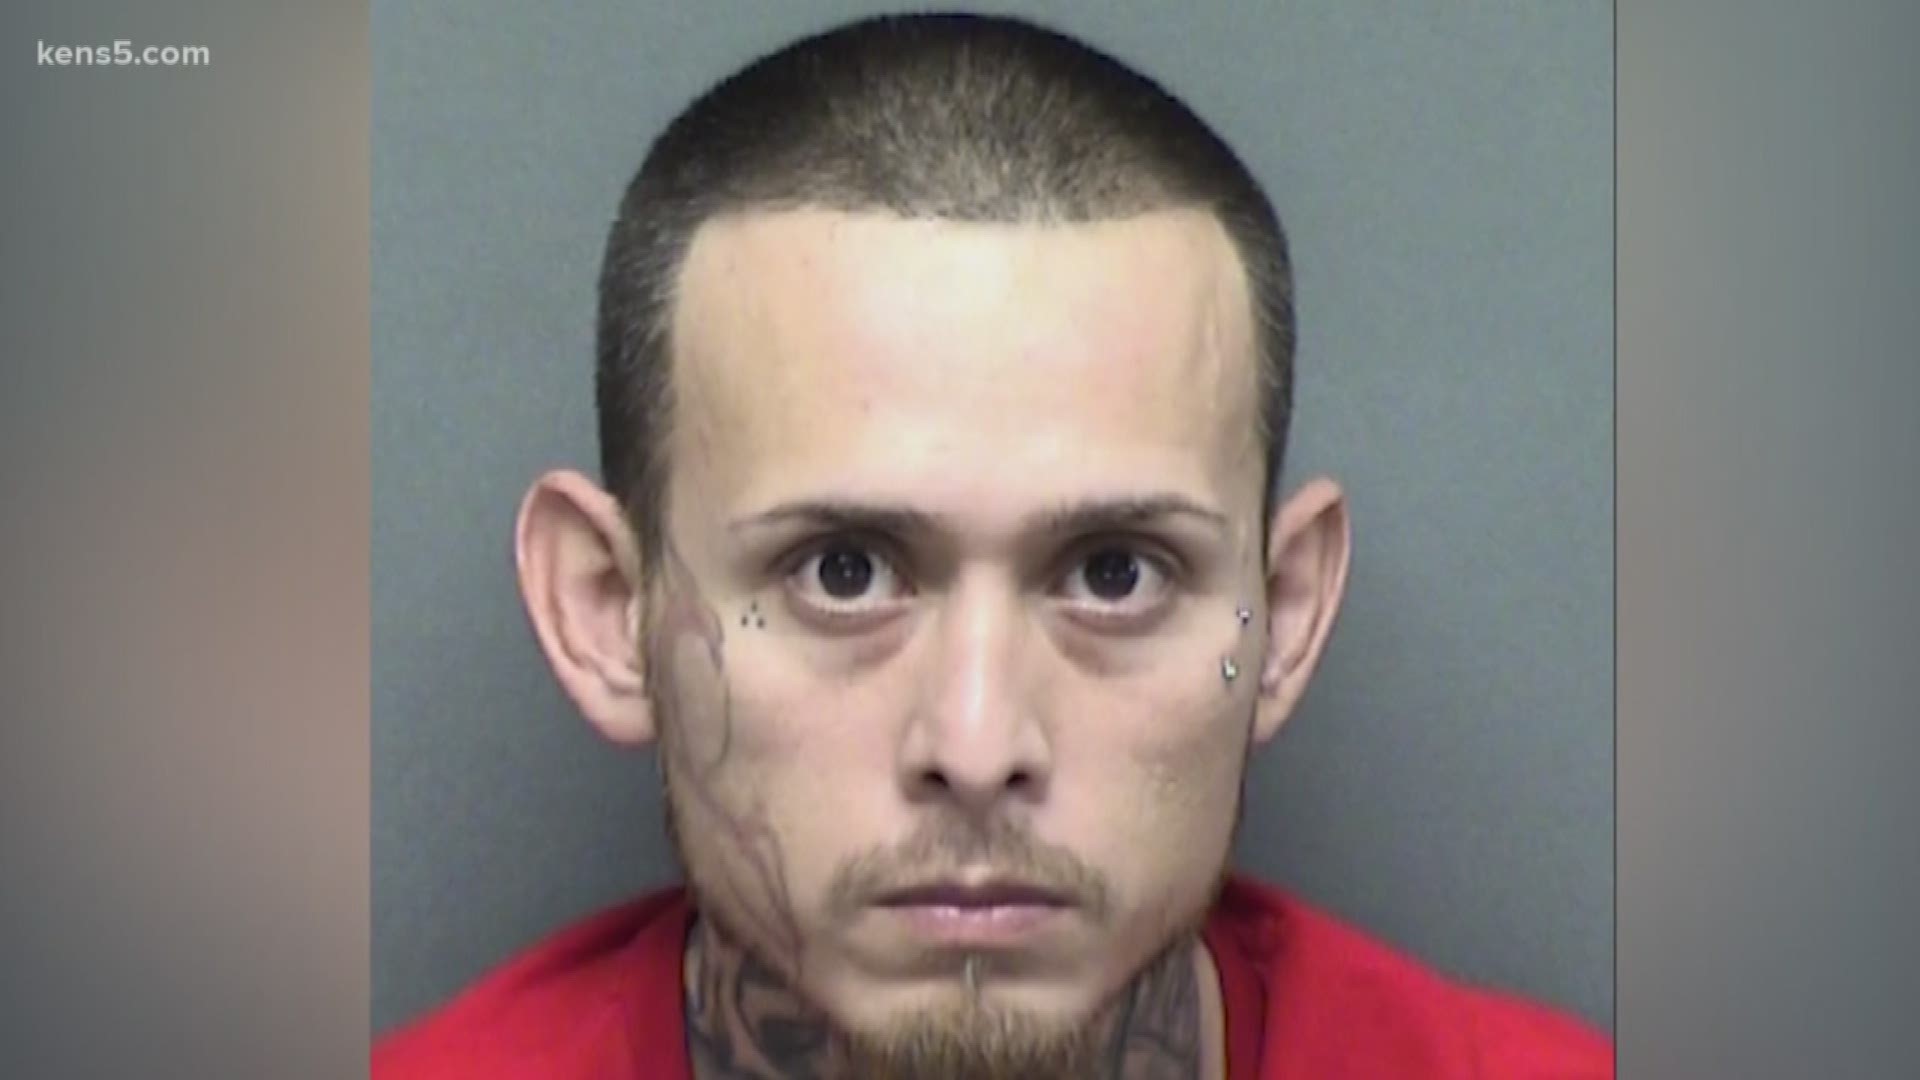 A San Antonio man accused of staging a kidnapping to cover-up his son's death, wants his bond reduced. Chris Davila faces charges in connection to the death of baby King Jay Davila. Authorities say Davila led detectives to the infant's body after attempting to cover up his death in January.